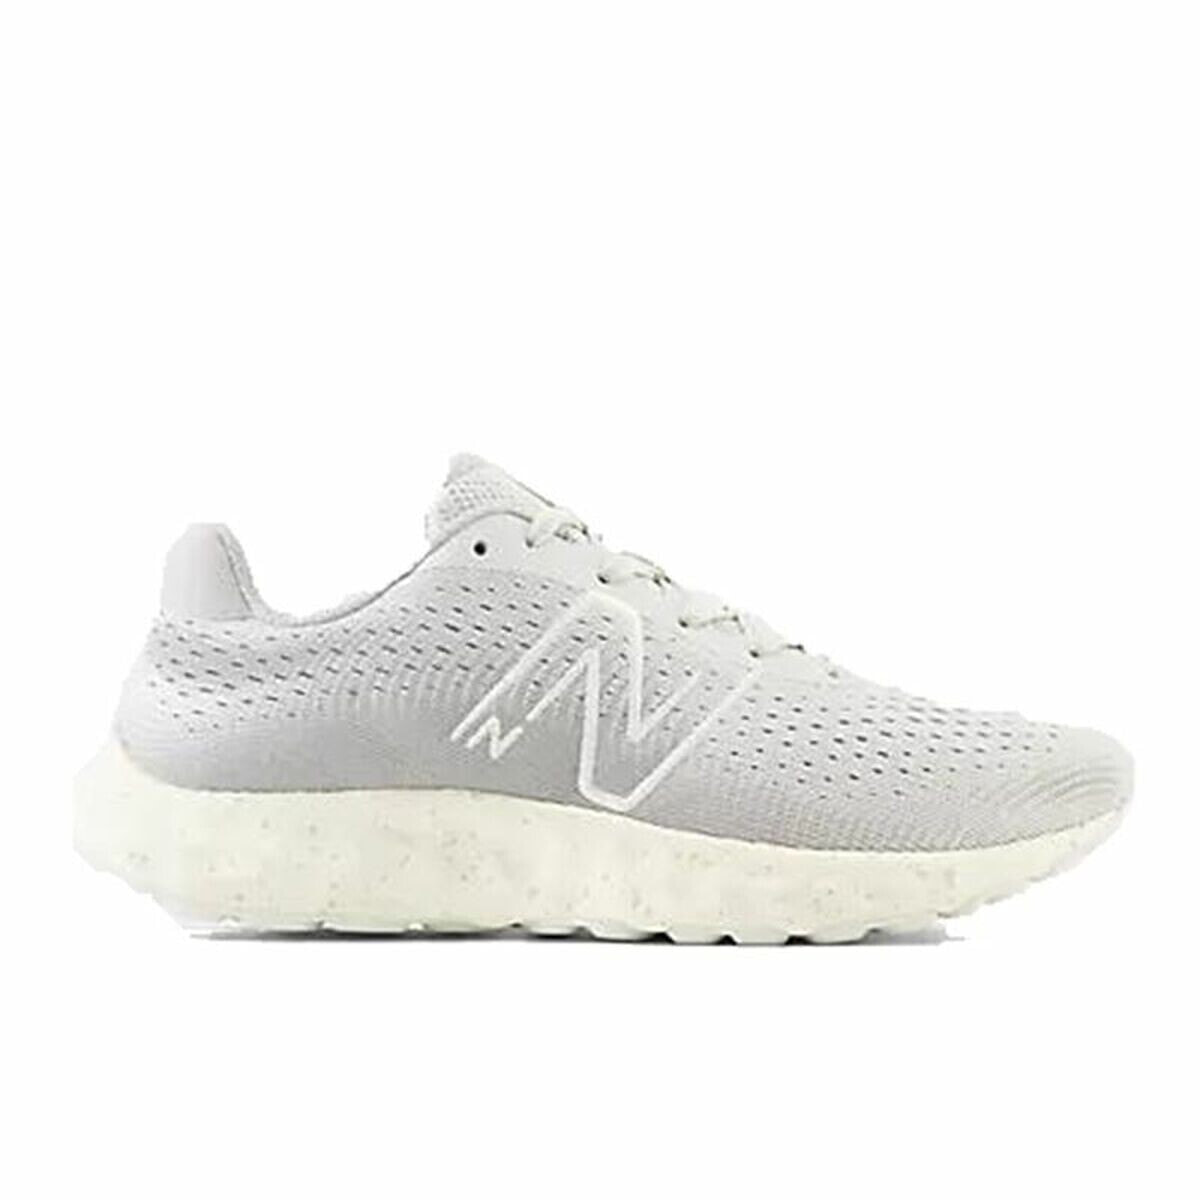 Running Shoes for Adults New Balance 520 V8 Lady Grey